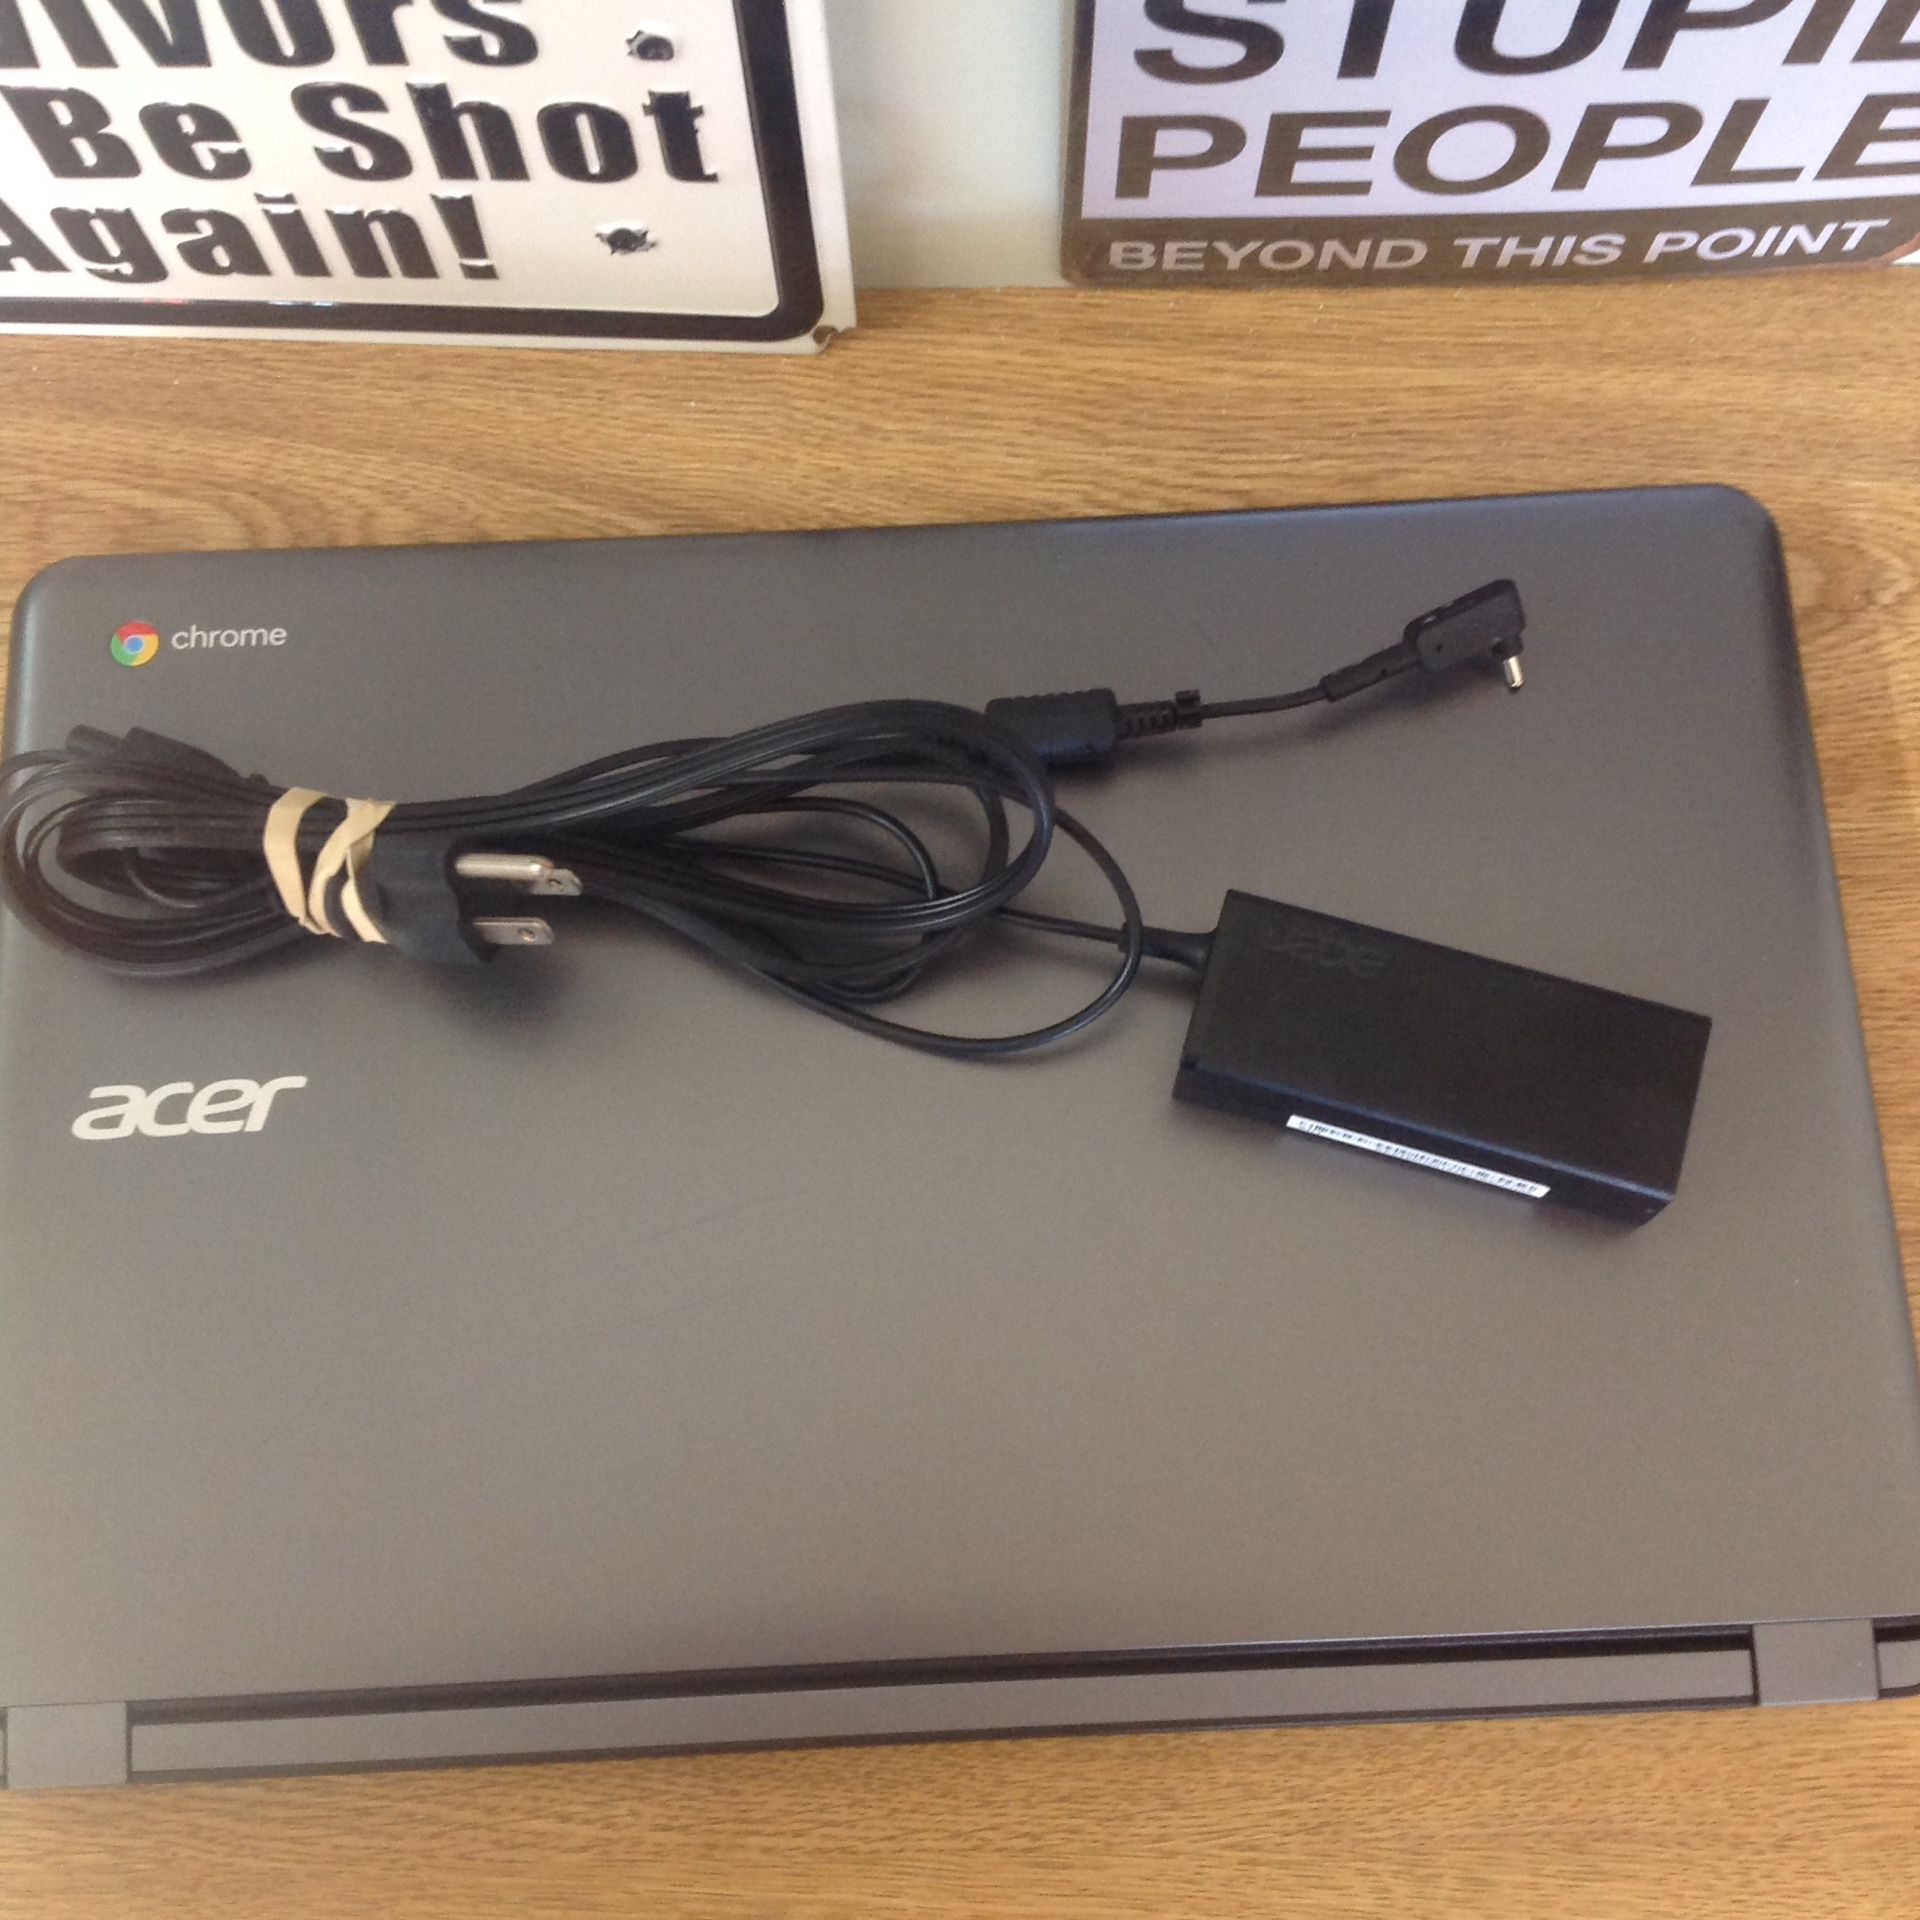 Acer Chromebook 15 Laptop with charger